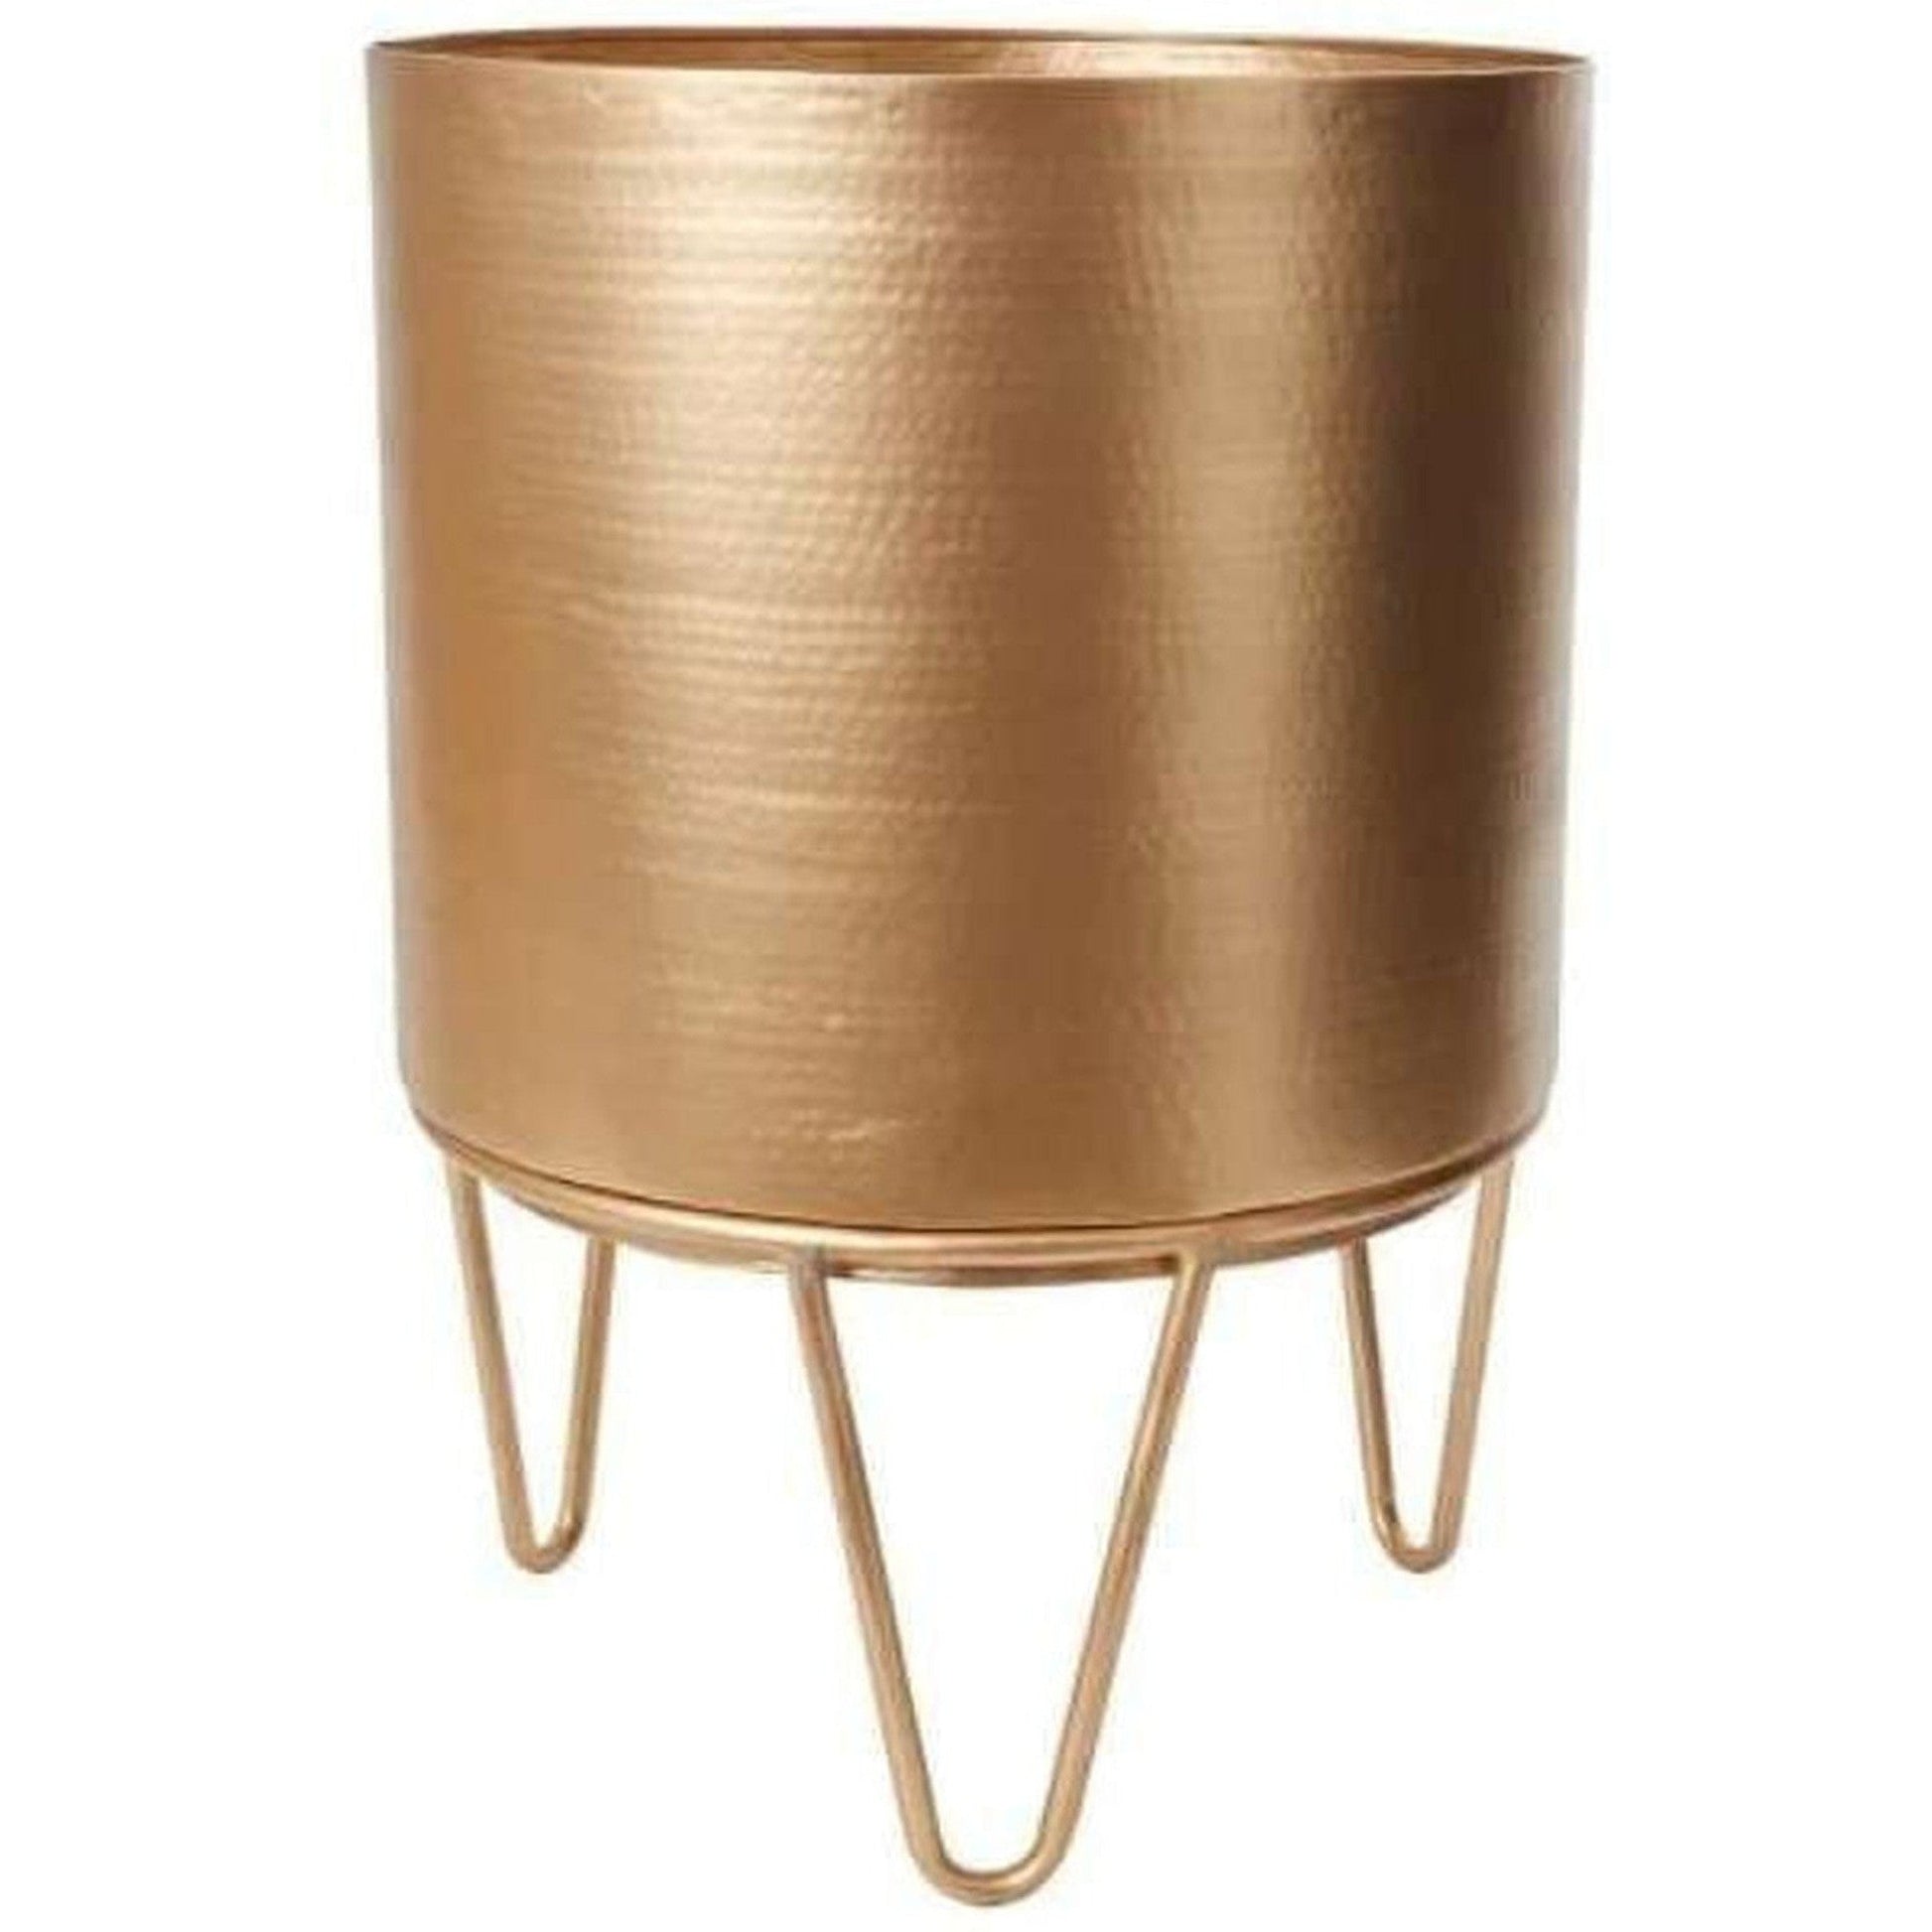 Brass Hammered Juneau Planter w/Stand-available at Hidden Seed Plant Shop